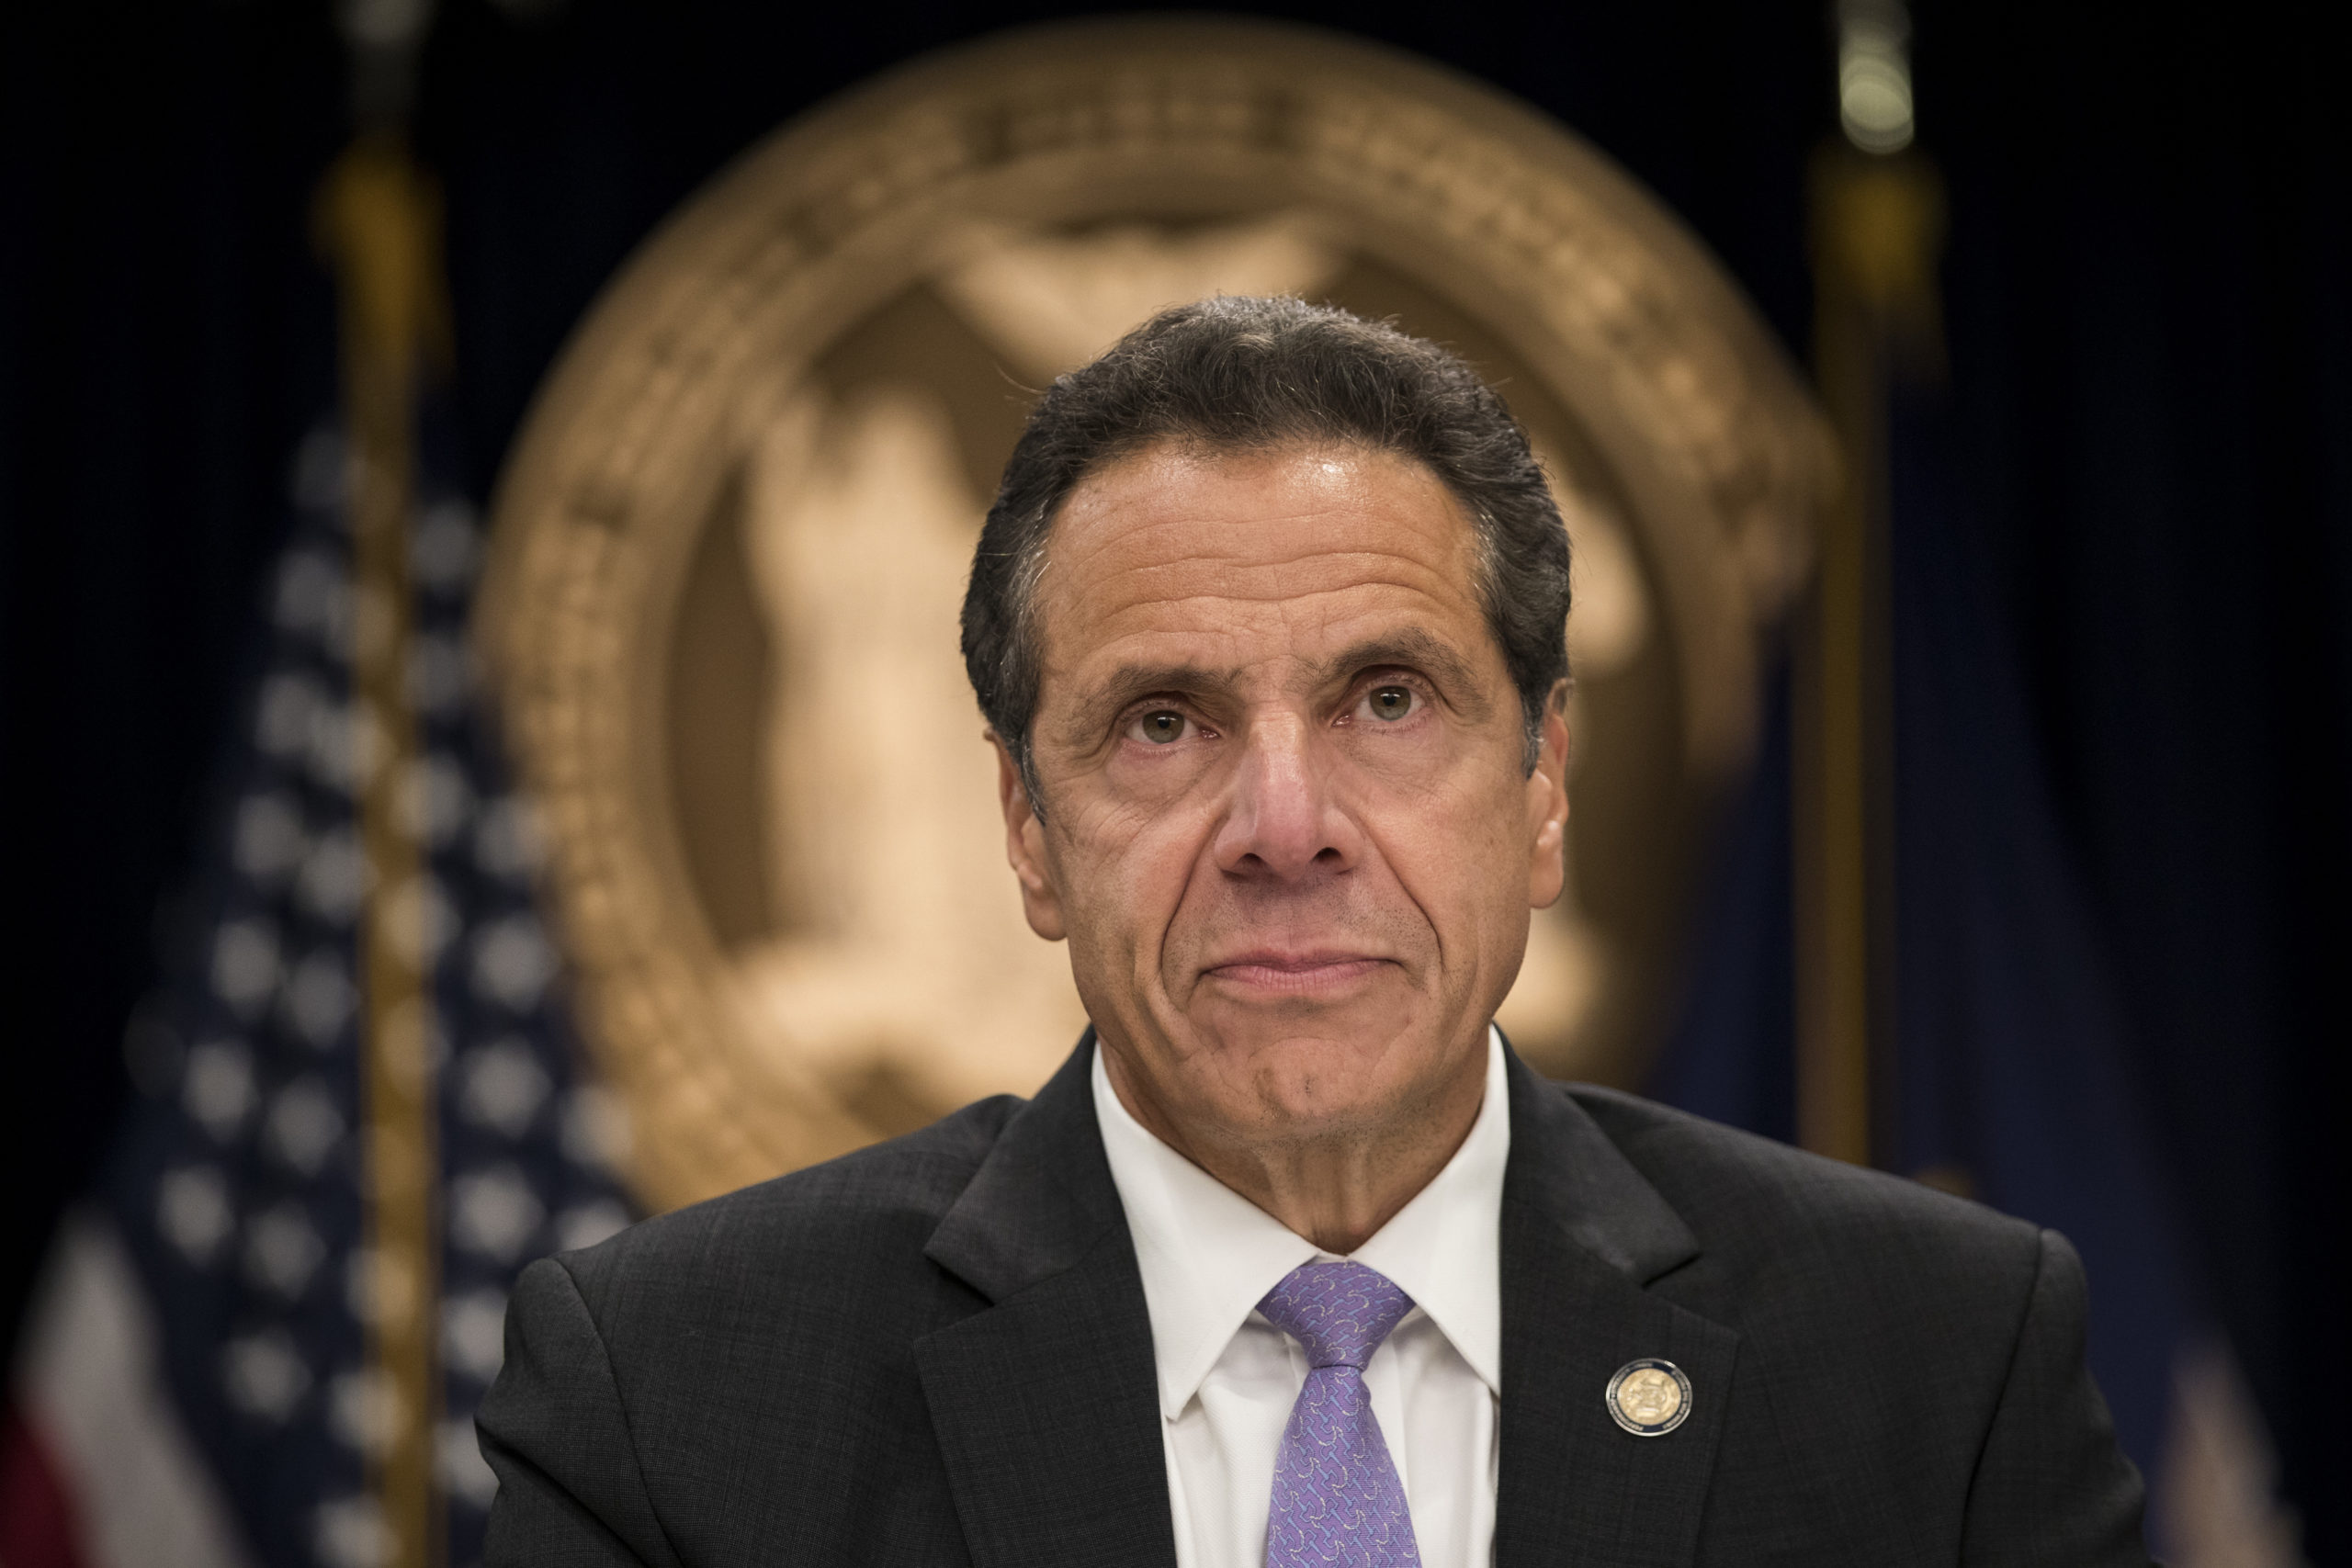 New York Governor Andrew Cuomo speaks during a press conference at his Midtown Manhattan office in 2018. (Drew Angerer/Getty Images)